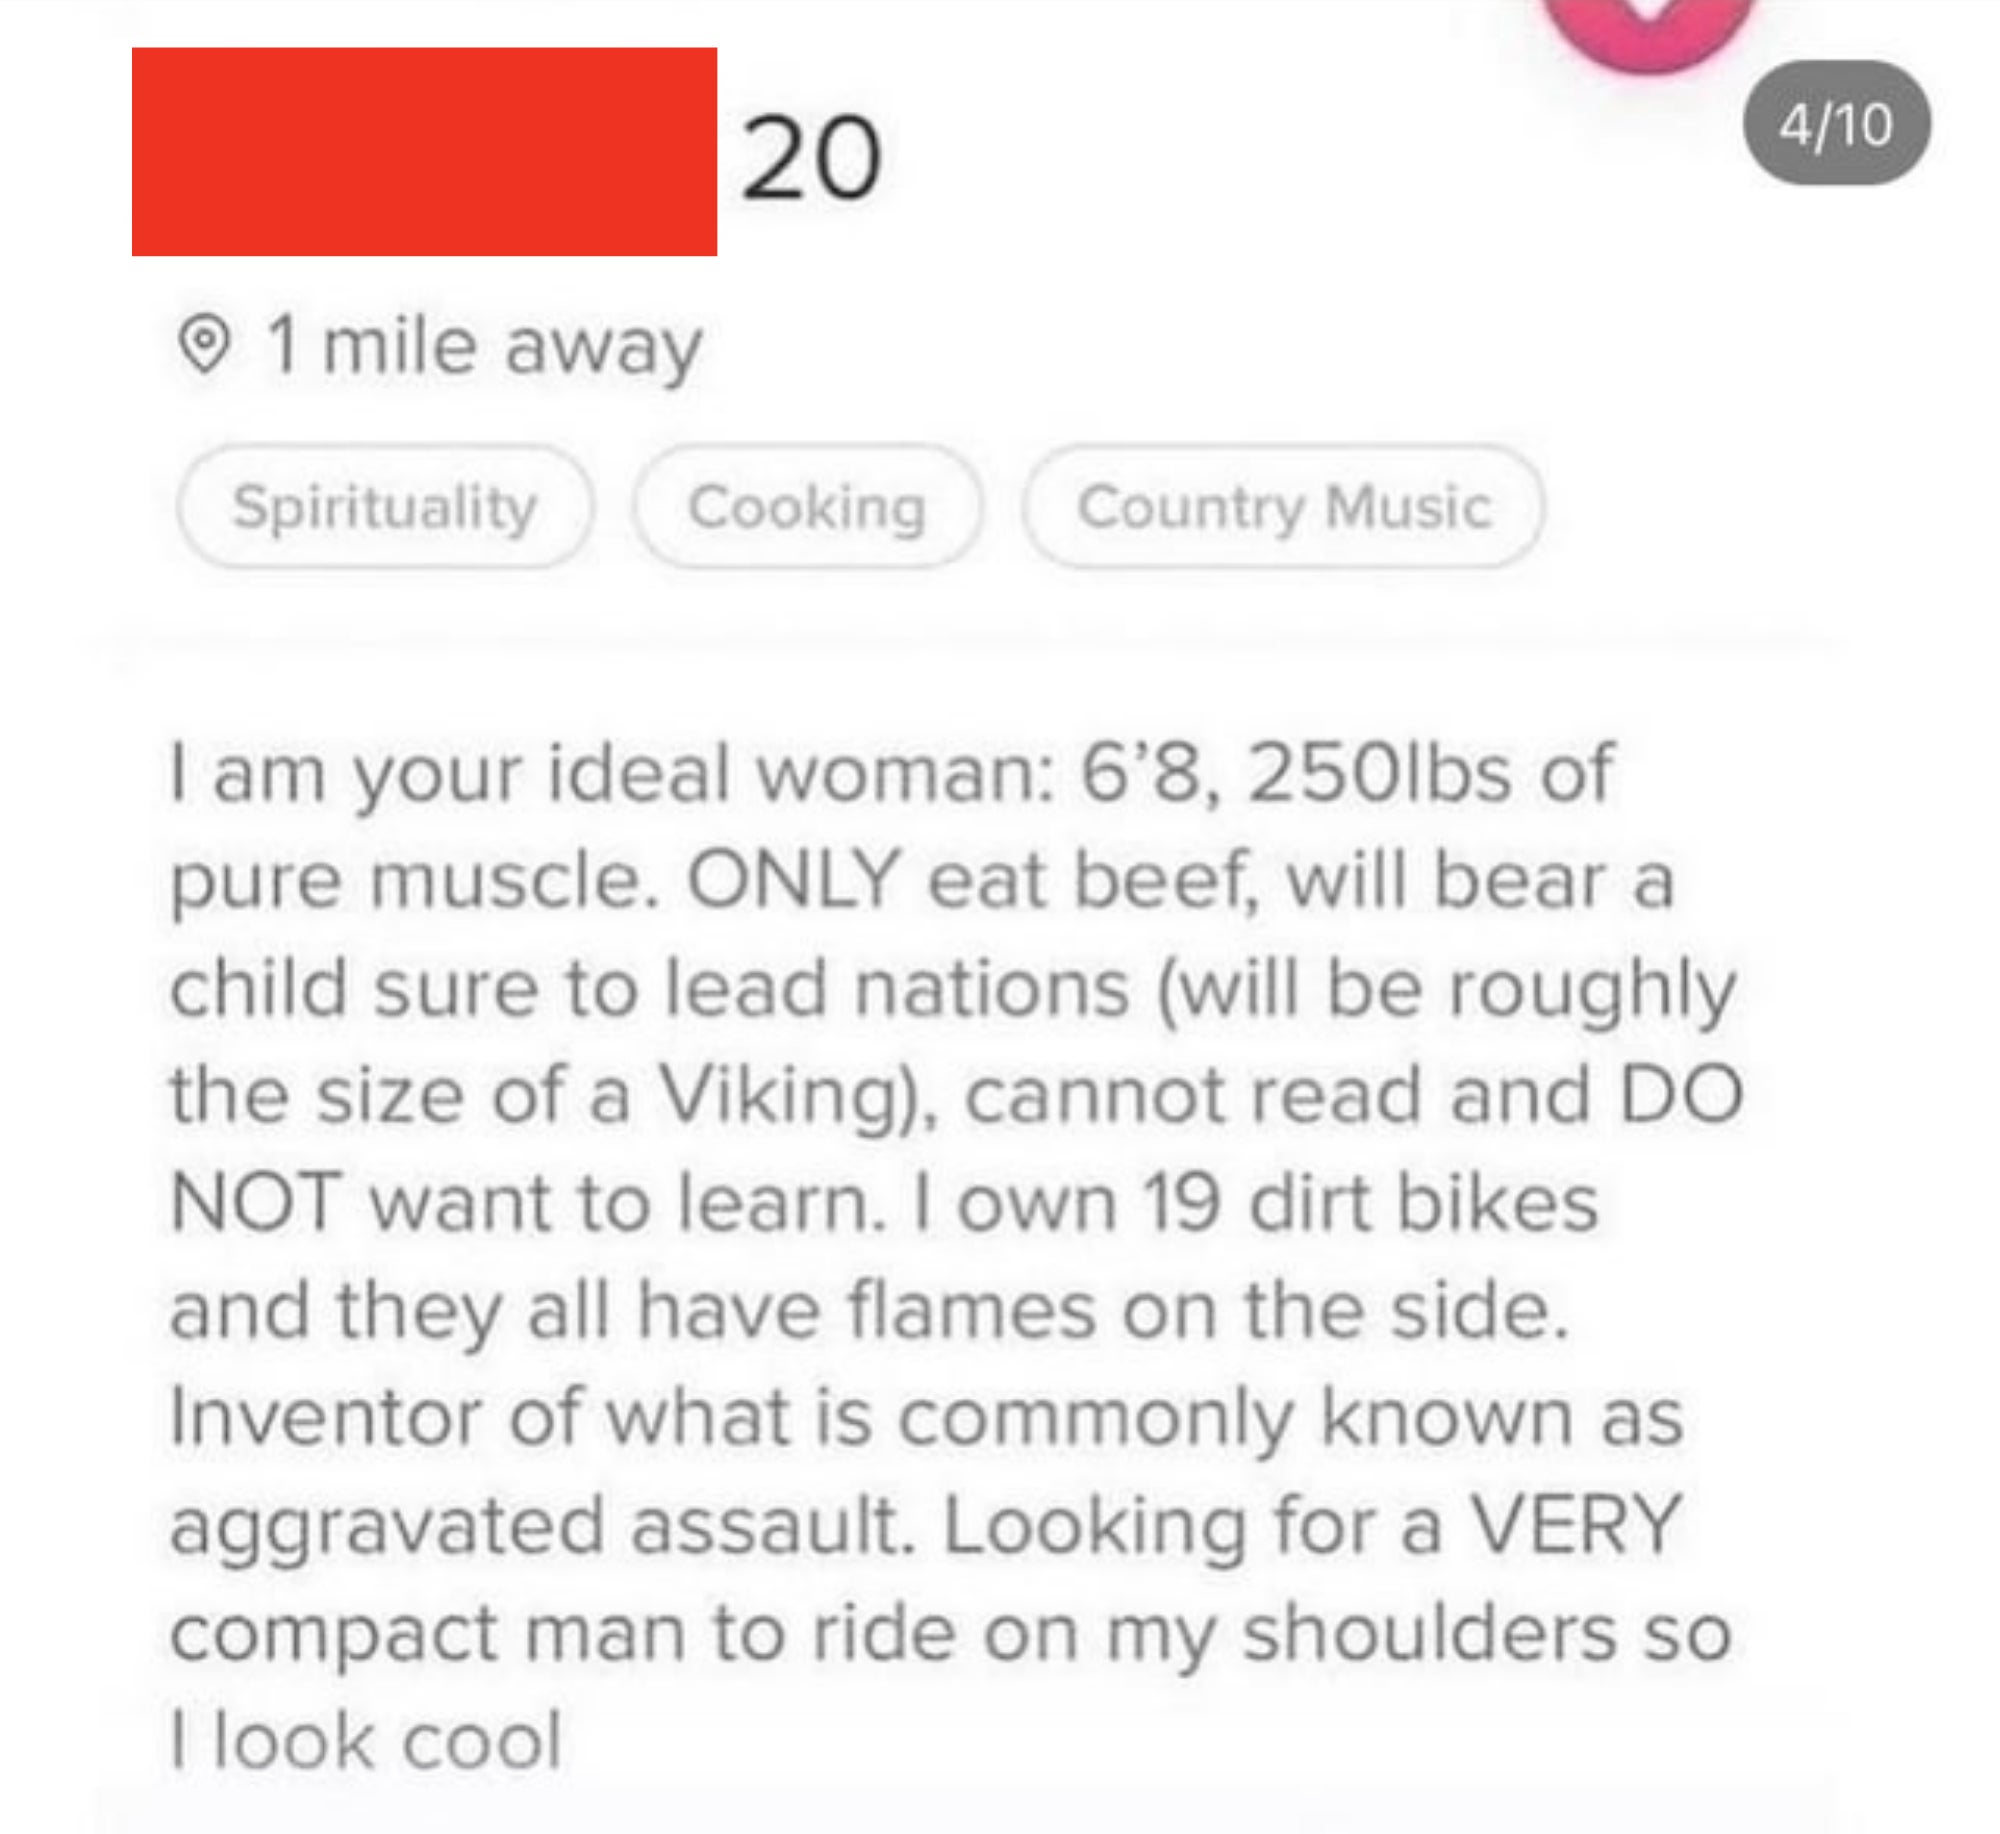 &quot;Looking for a VERY compact man to ride on my shoulders so I look cool&quot;